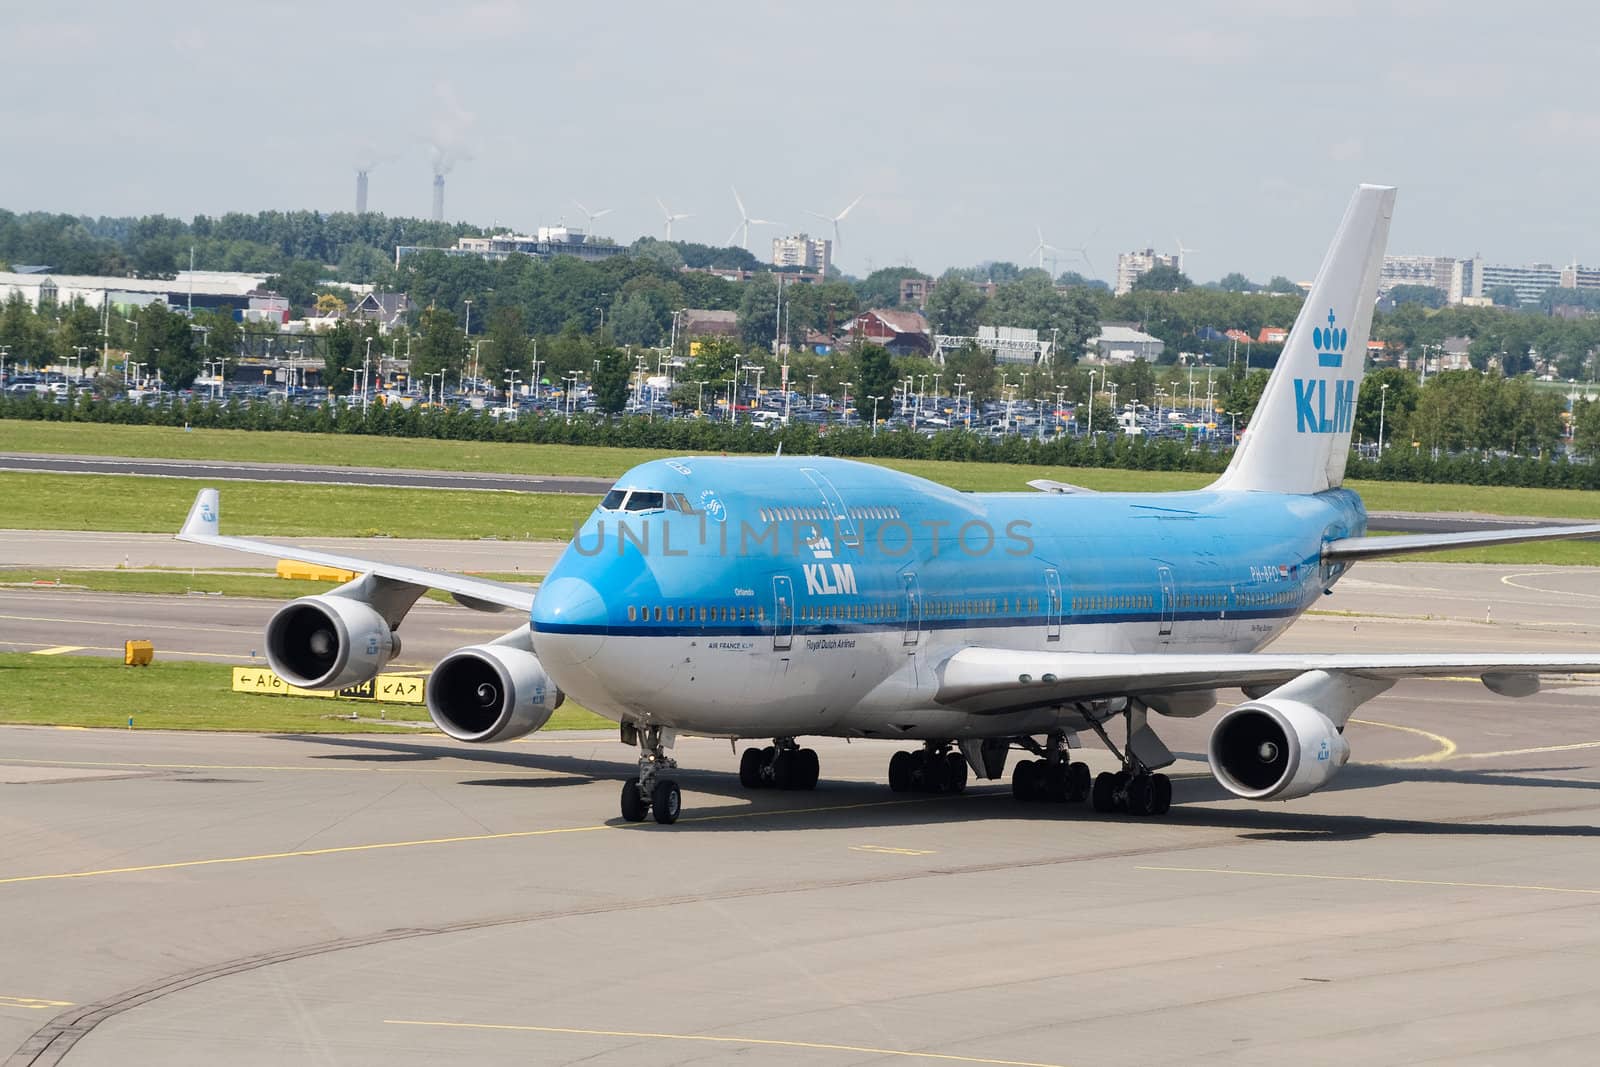 KLM Airline Boeing 747-406 in Schiphol airport in the Netherlands